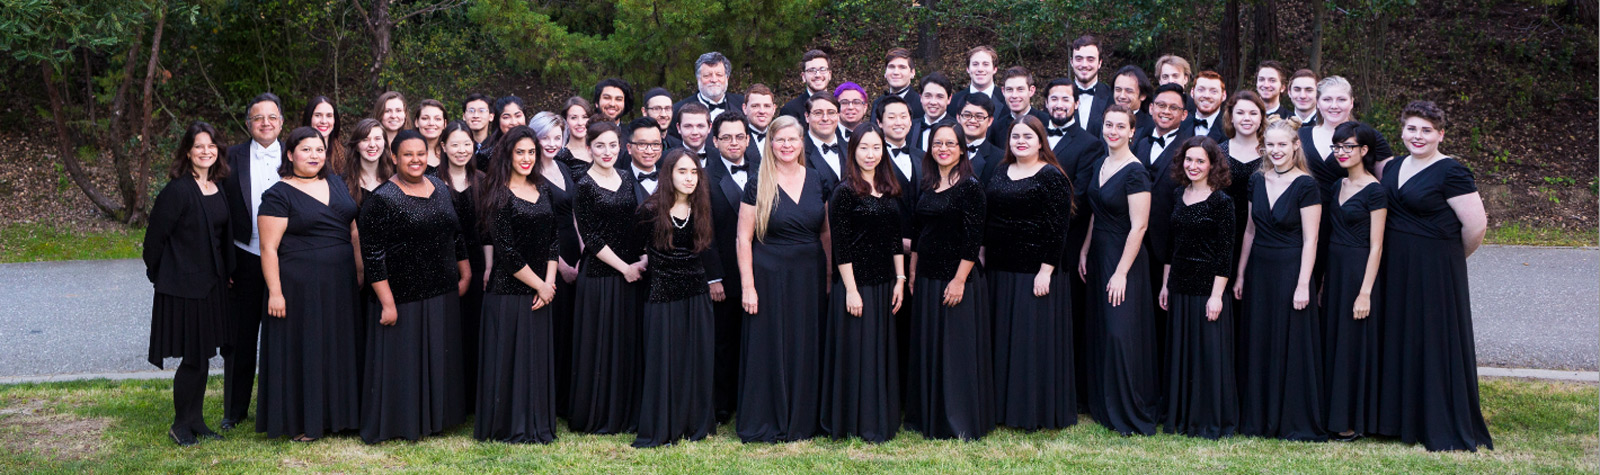 Choral and Vocal Music | West Valley College